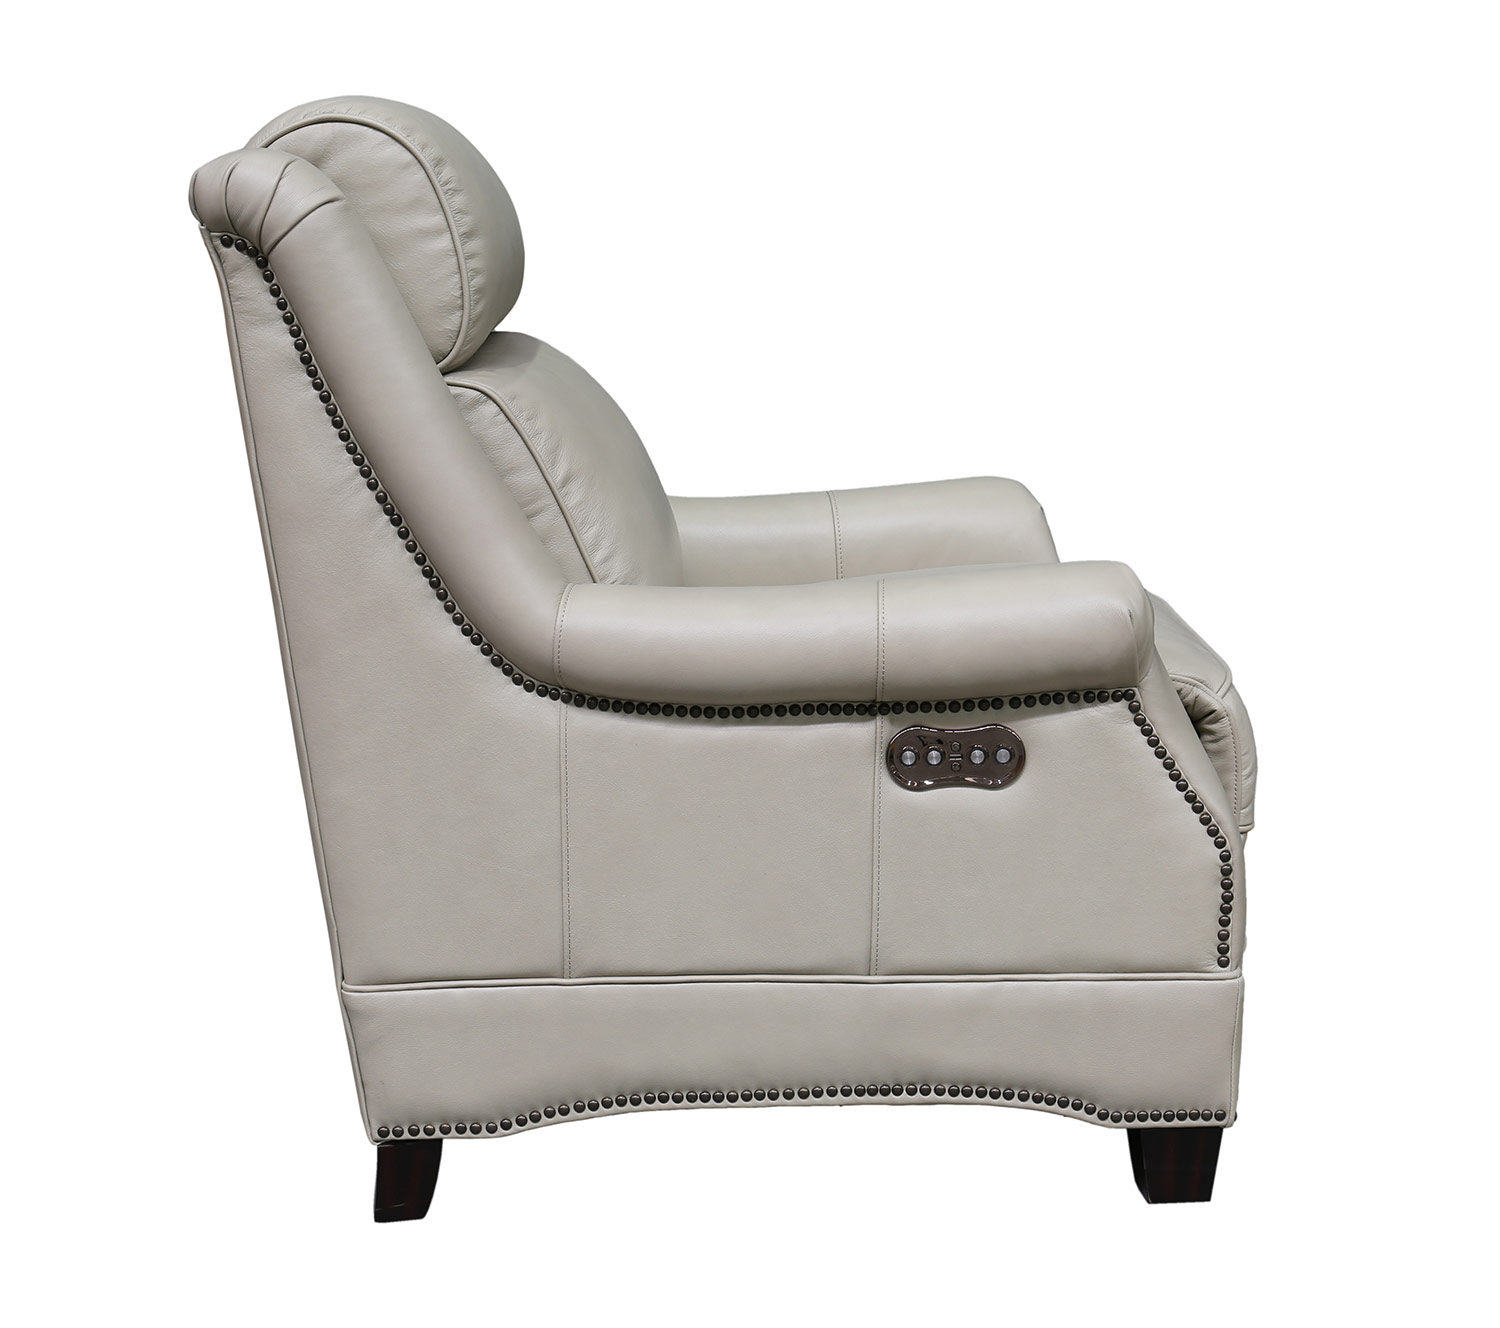 Barcalounger Warrendale Power Recliner Chair with Power Head Rest - Shoreham Cream/All Leather